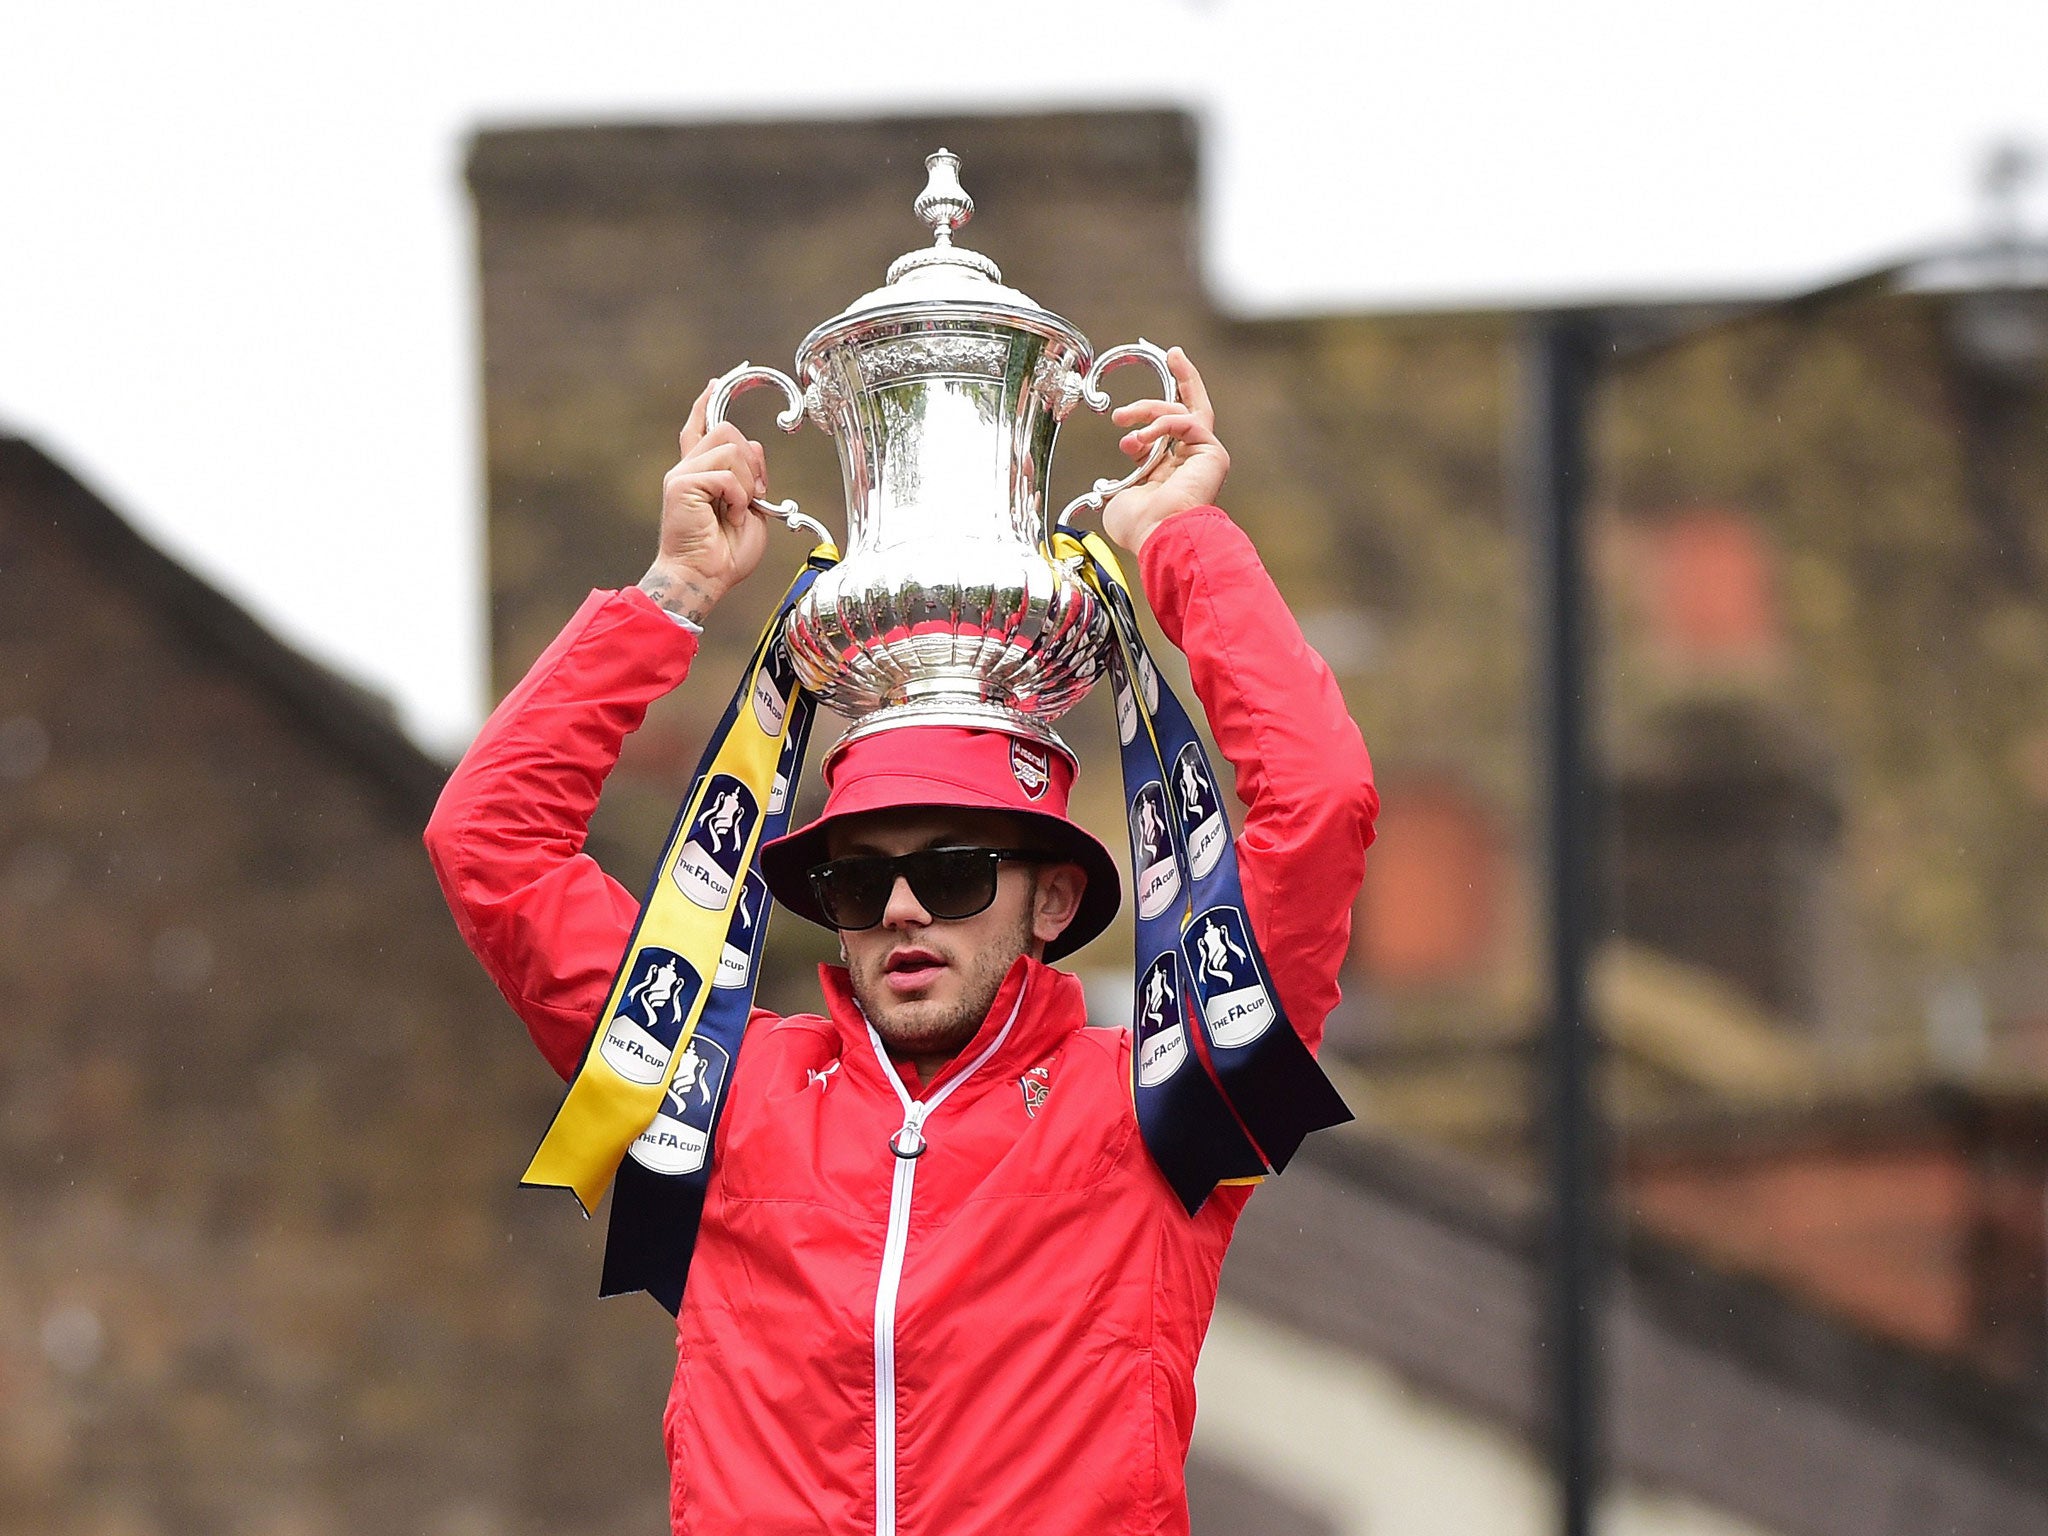 Jack Wilshere puts the trophy on his head